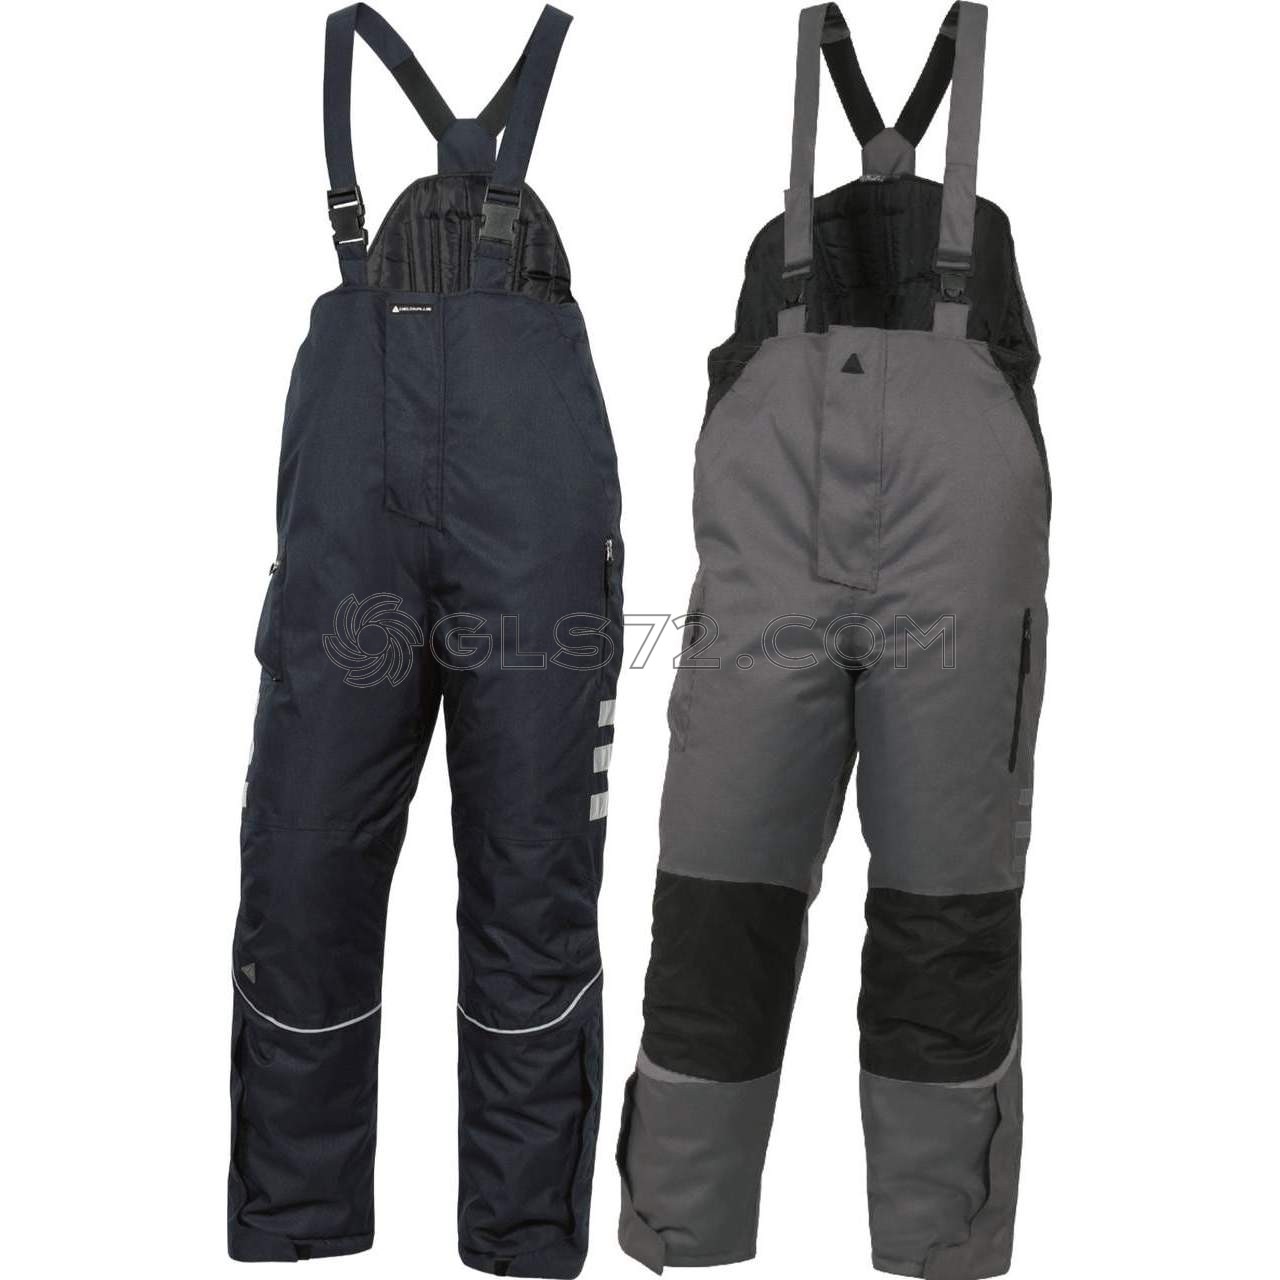 EXTREME COLD WEATHER TROUSERS WORKING THERMAL WINTER PANTS MEN